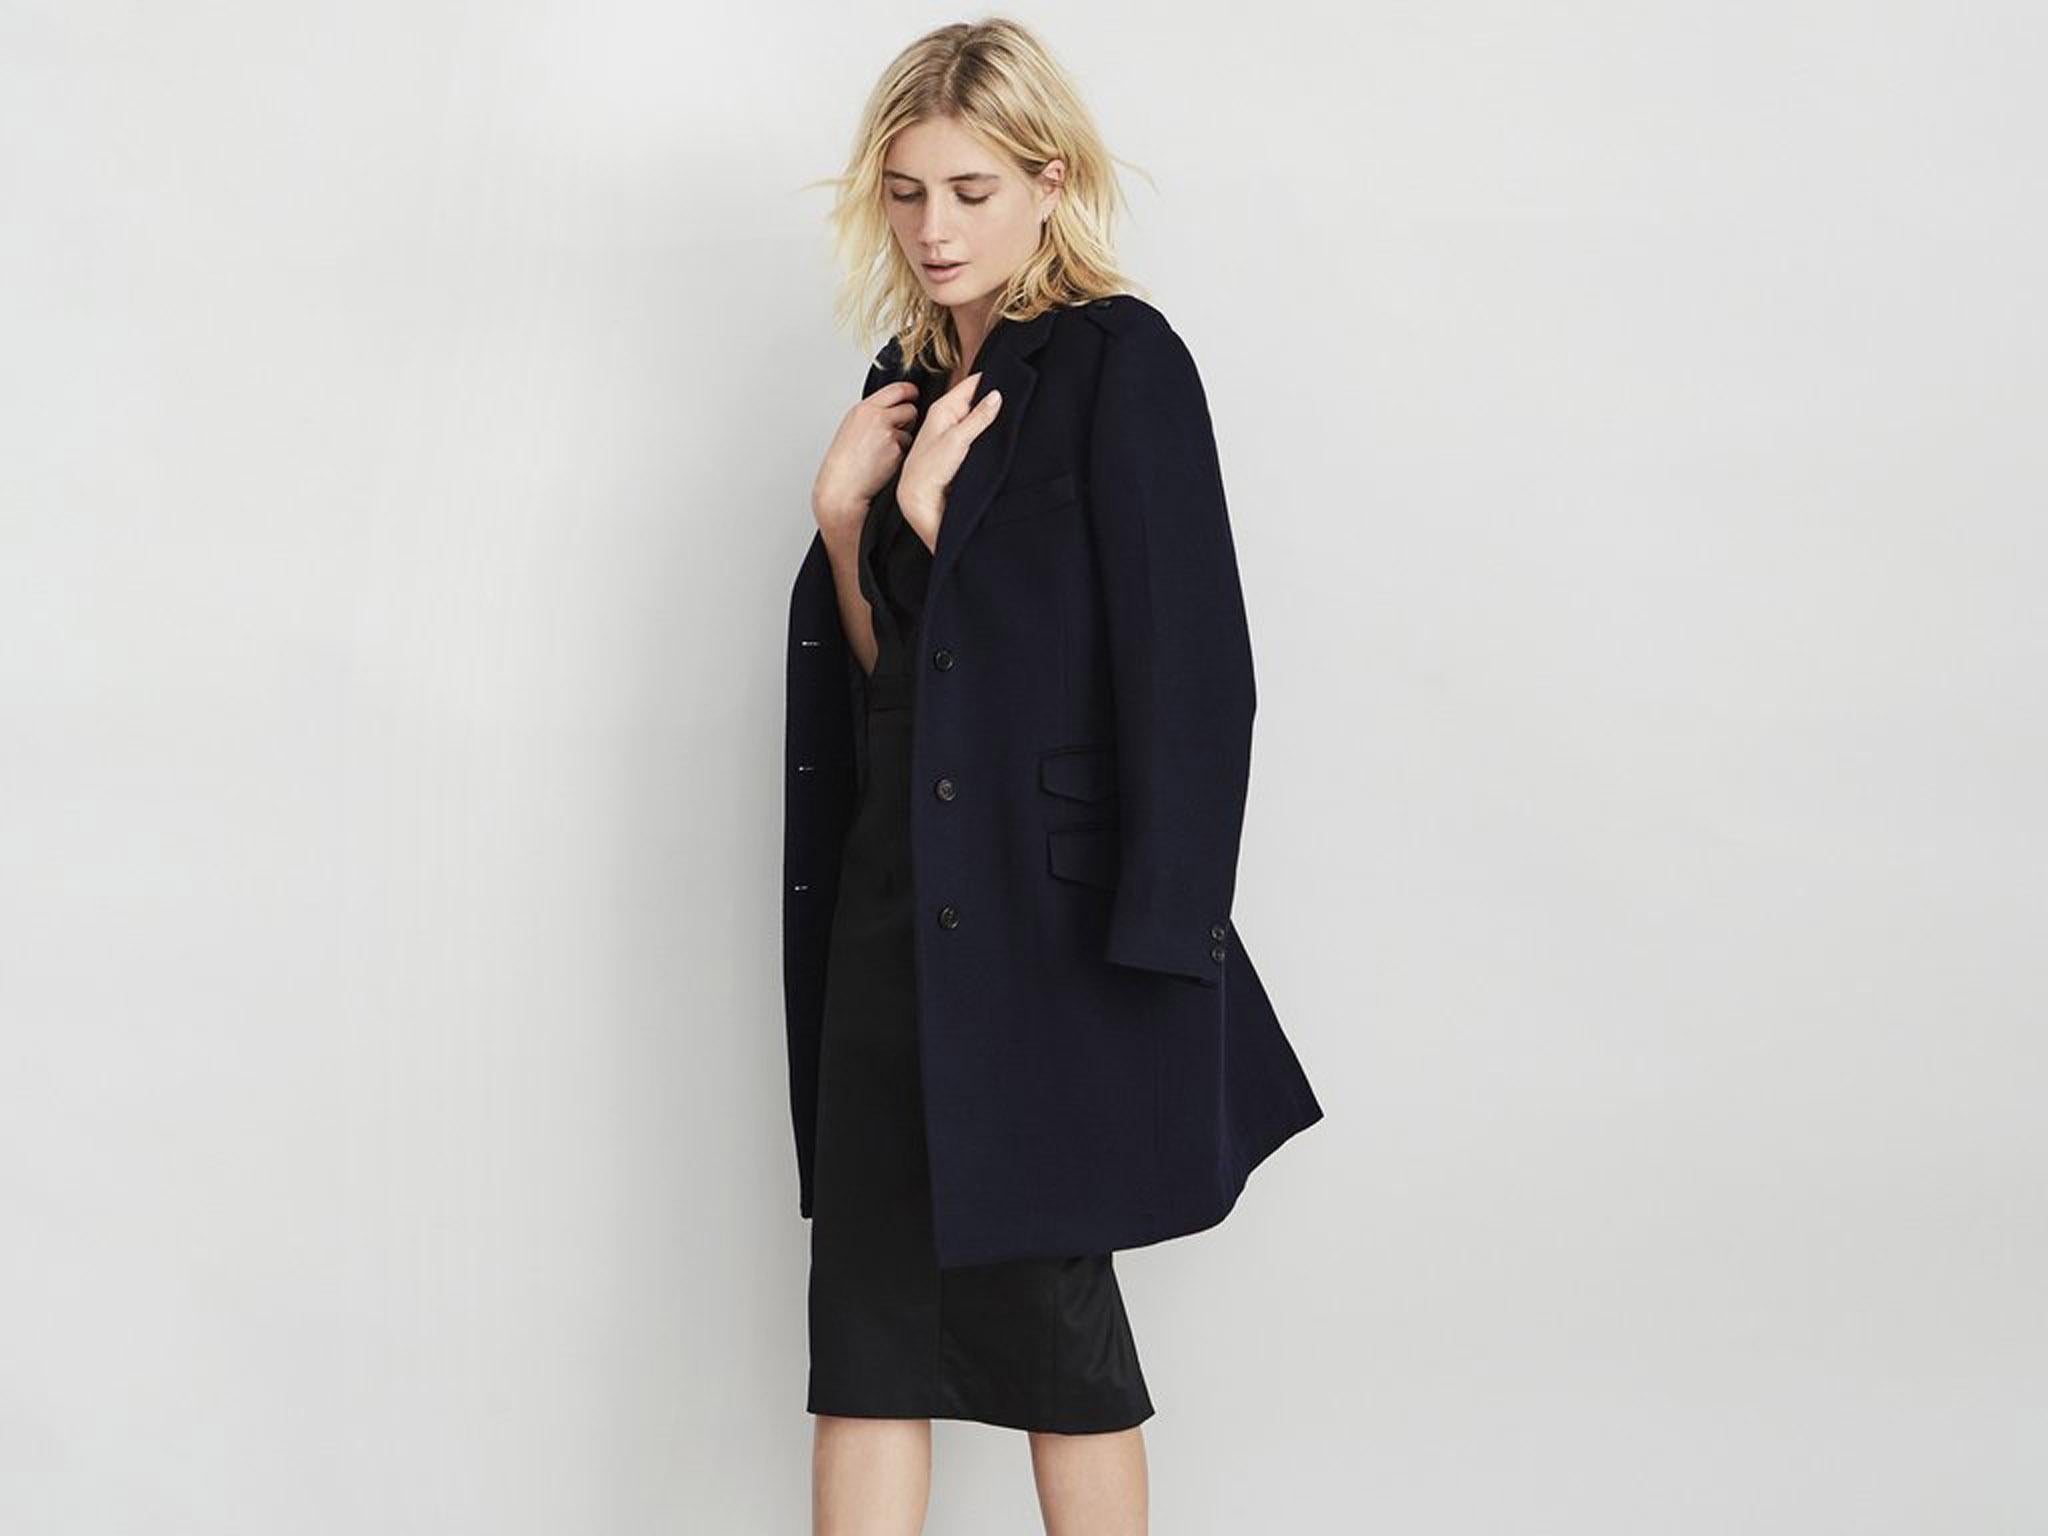 Goop Label's Gwyneth Soft Crombie Coat will set you back $1,195